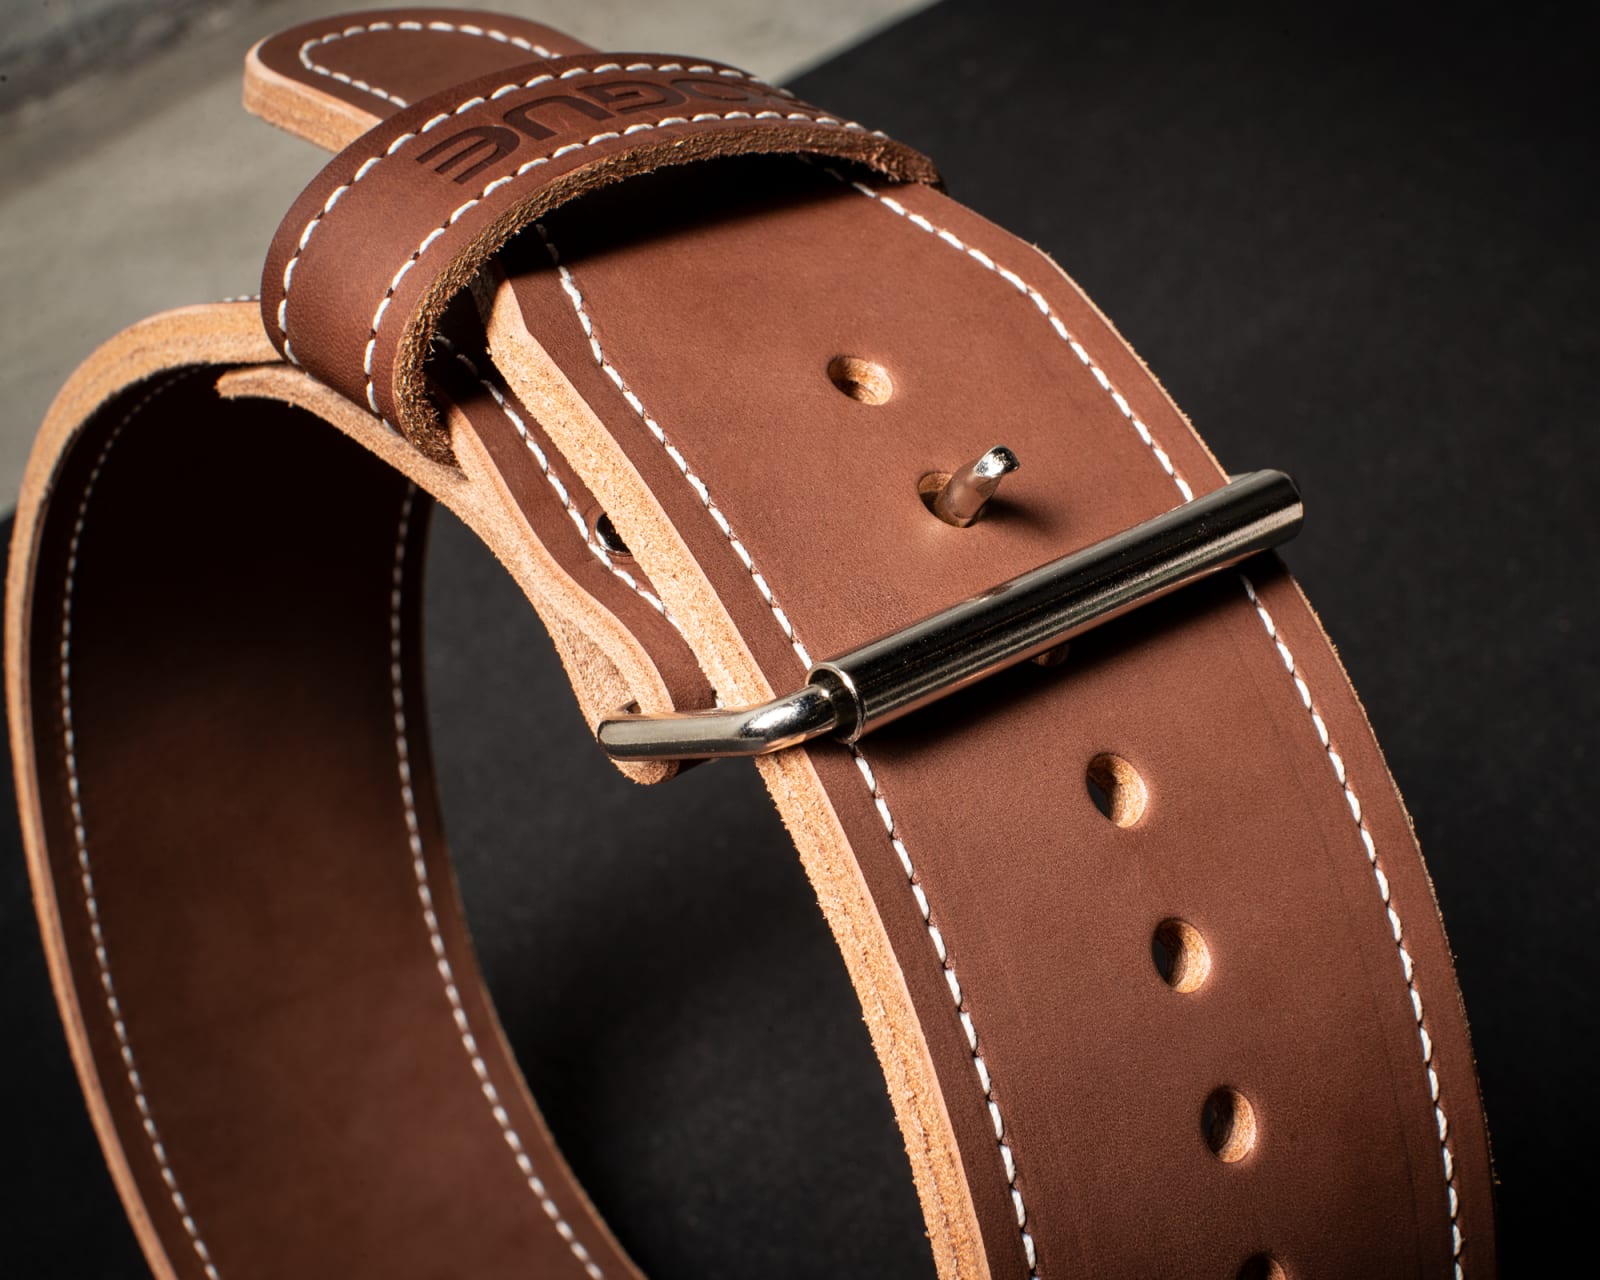 Rogue Leather Belt - Handmade High-Quality Leather Belt, Made in the USA